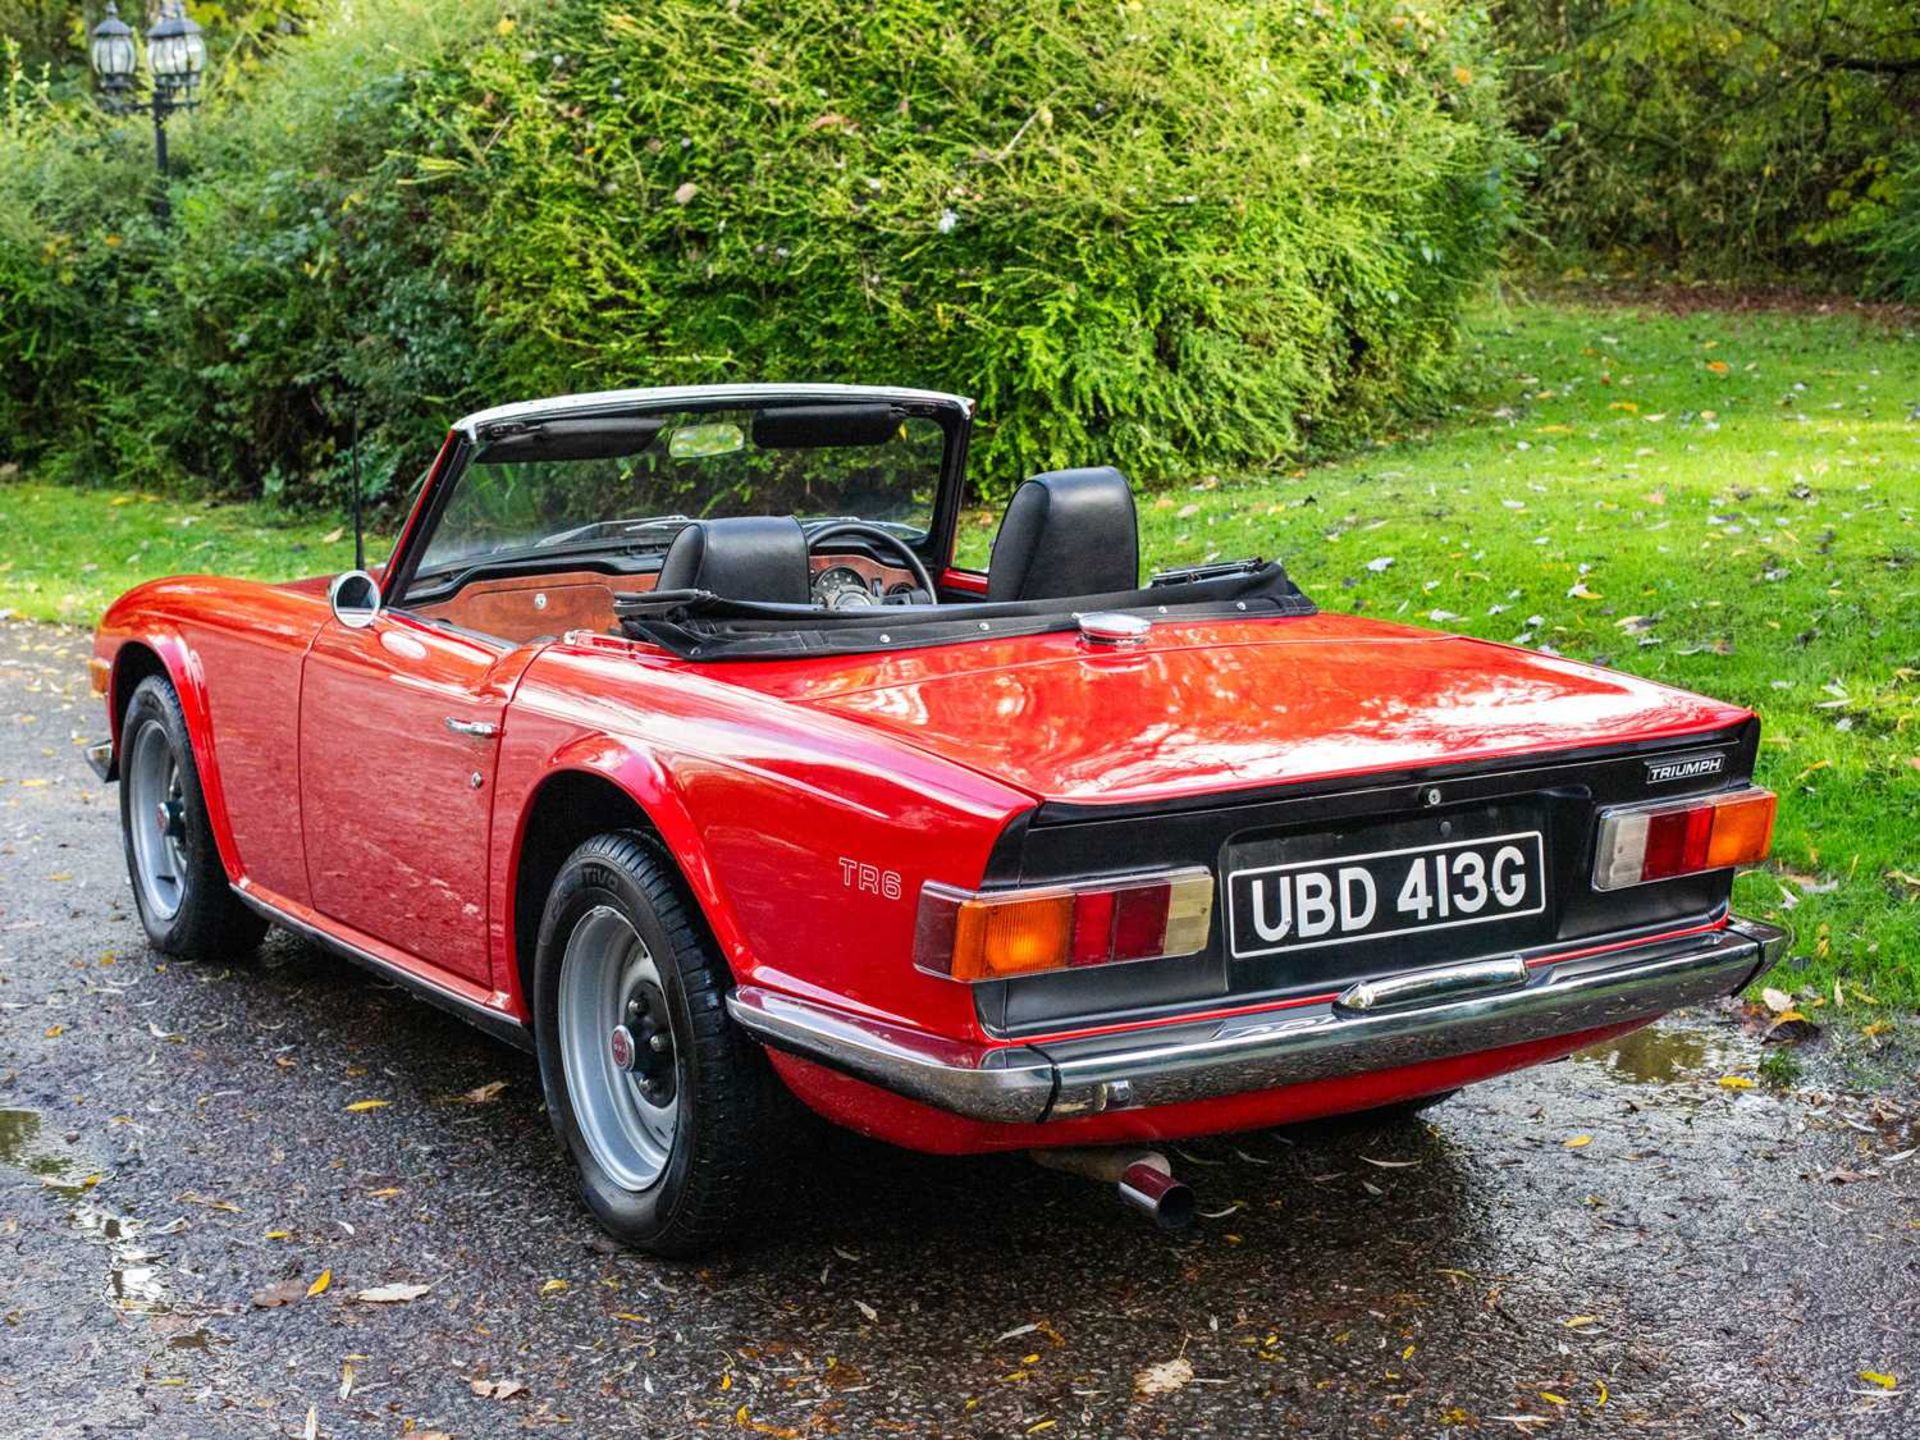 1969 Triumph TR6 Repatriated in 2020, converted to RHD and equipped with UK-specification SU carbure - Image 8 of 53